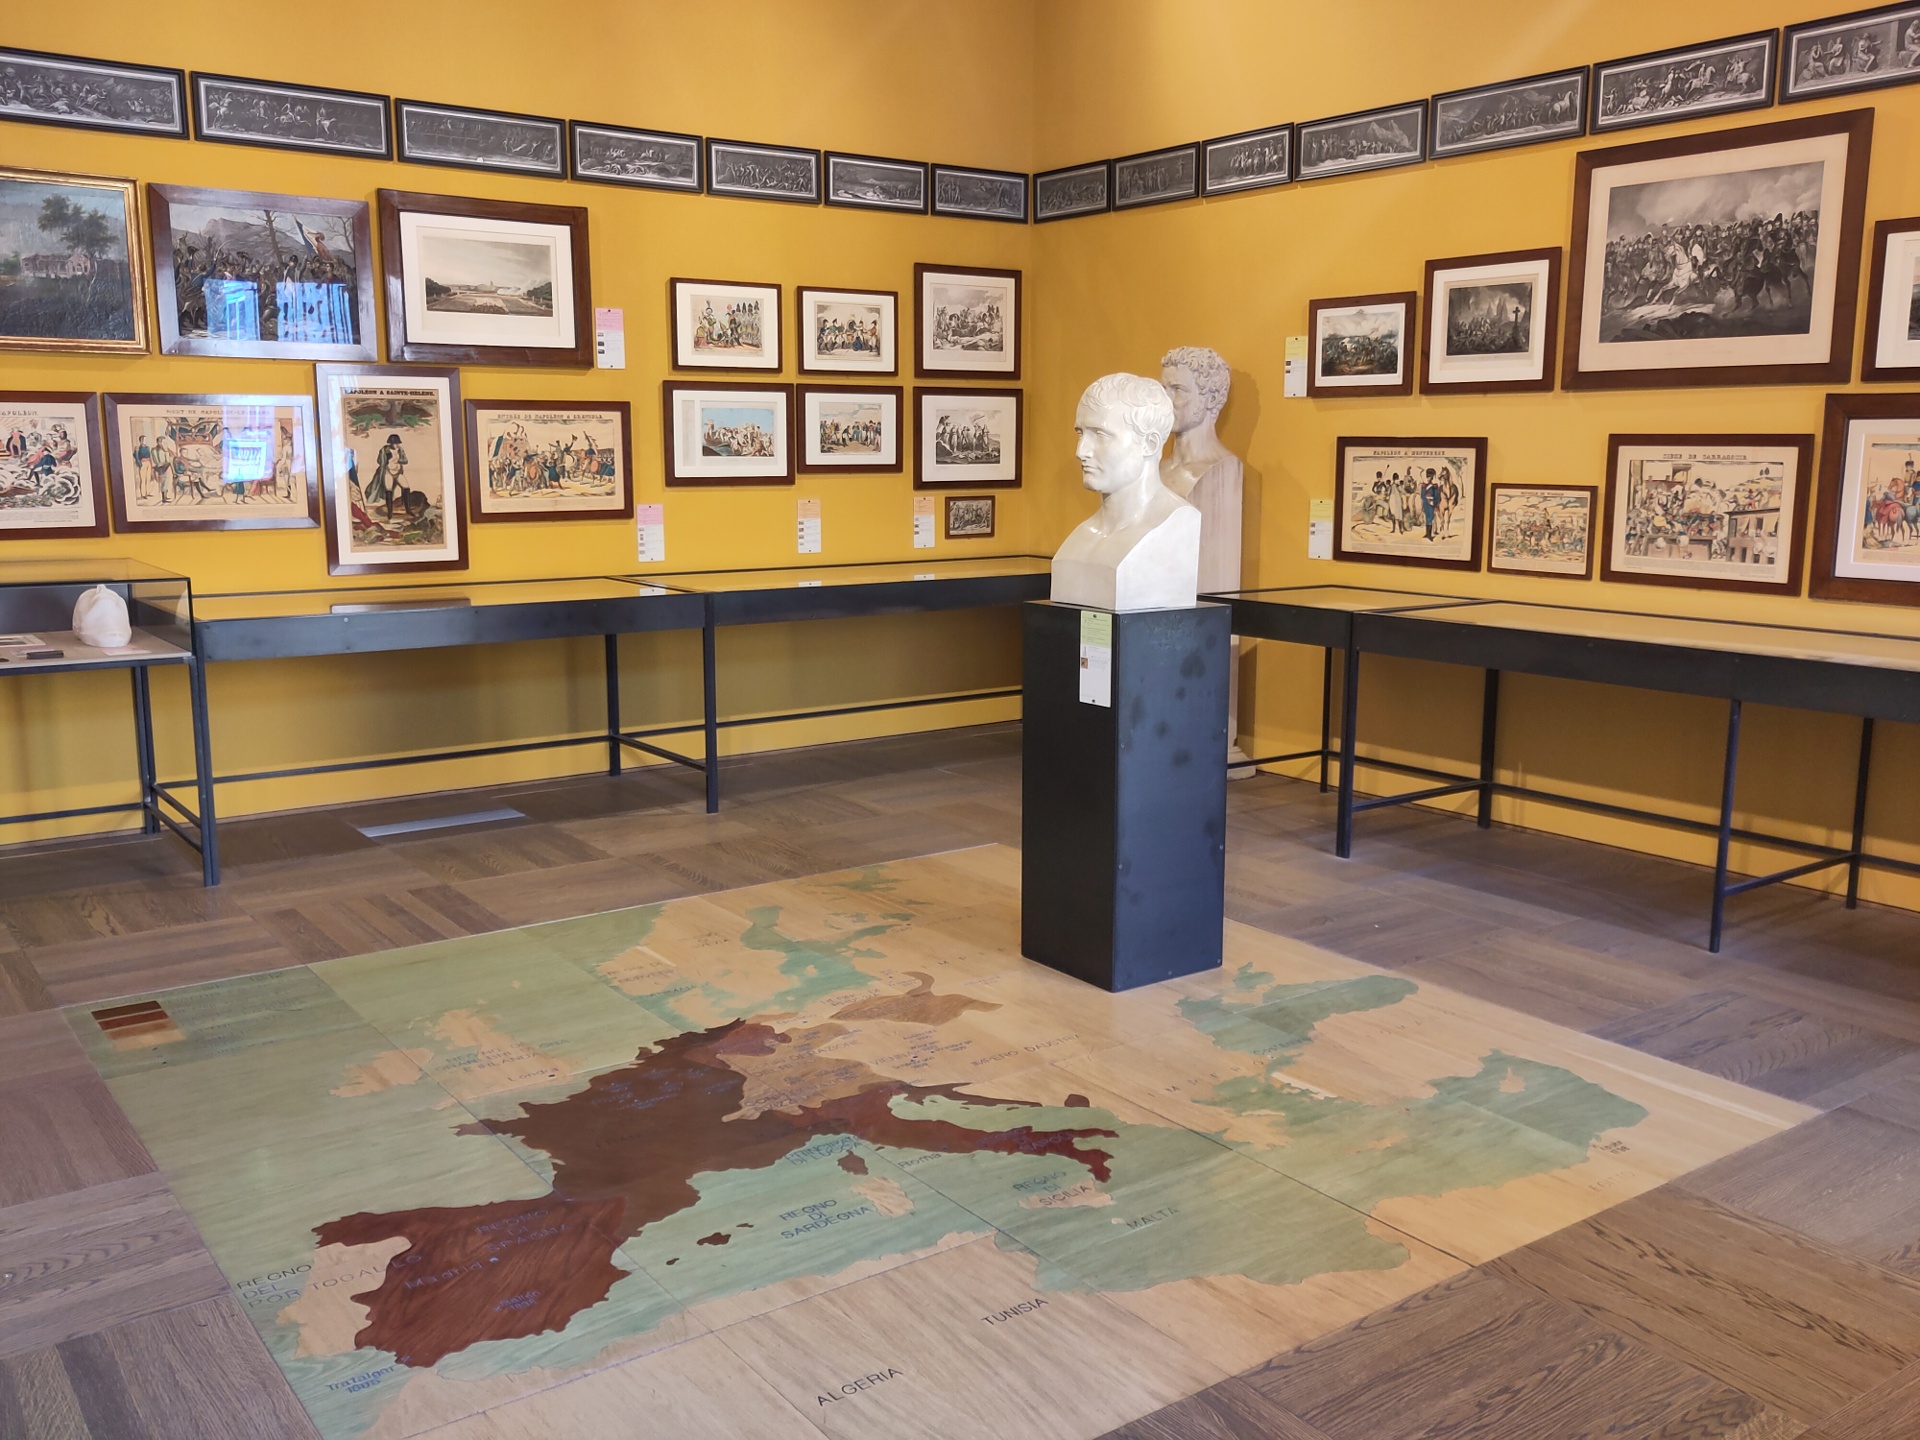 A bust of Napoleon overlooking a map of Europe (as of his conquests). The yellow walls are covered in varied images of the times.